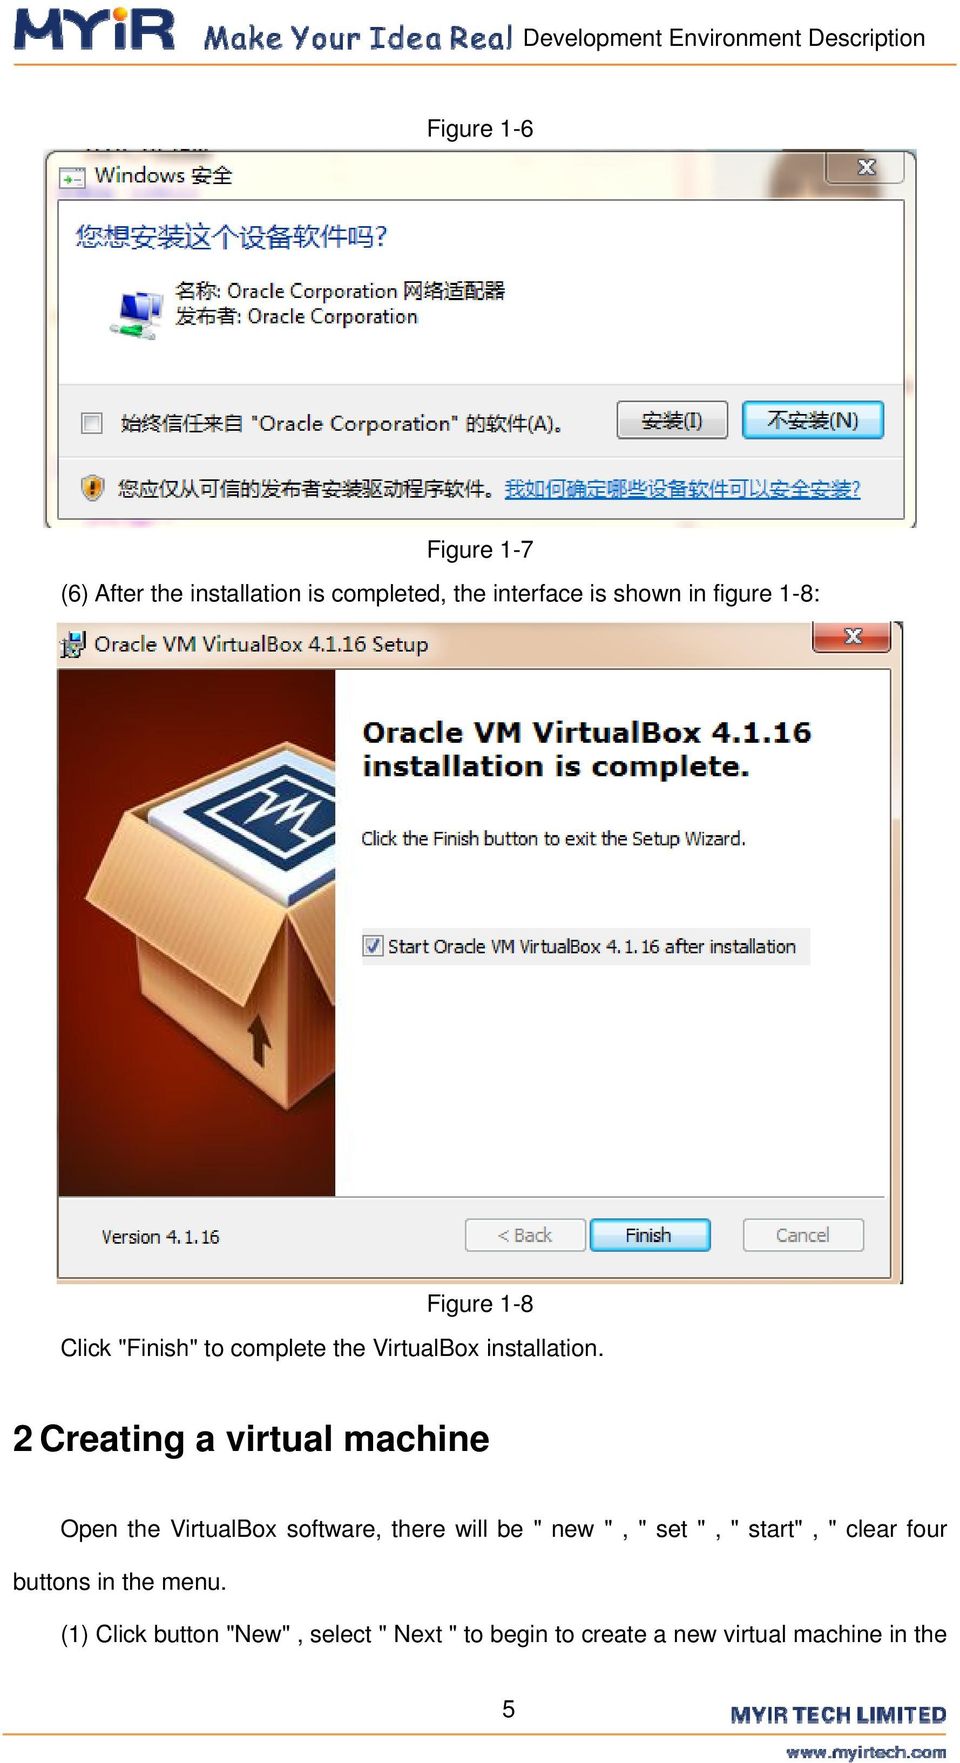 2 Creating a virtual machine Open the VirtualBox software, there will be " new ", " set ", "